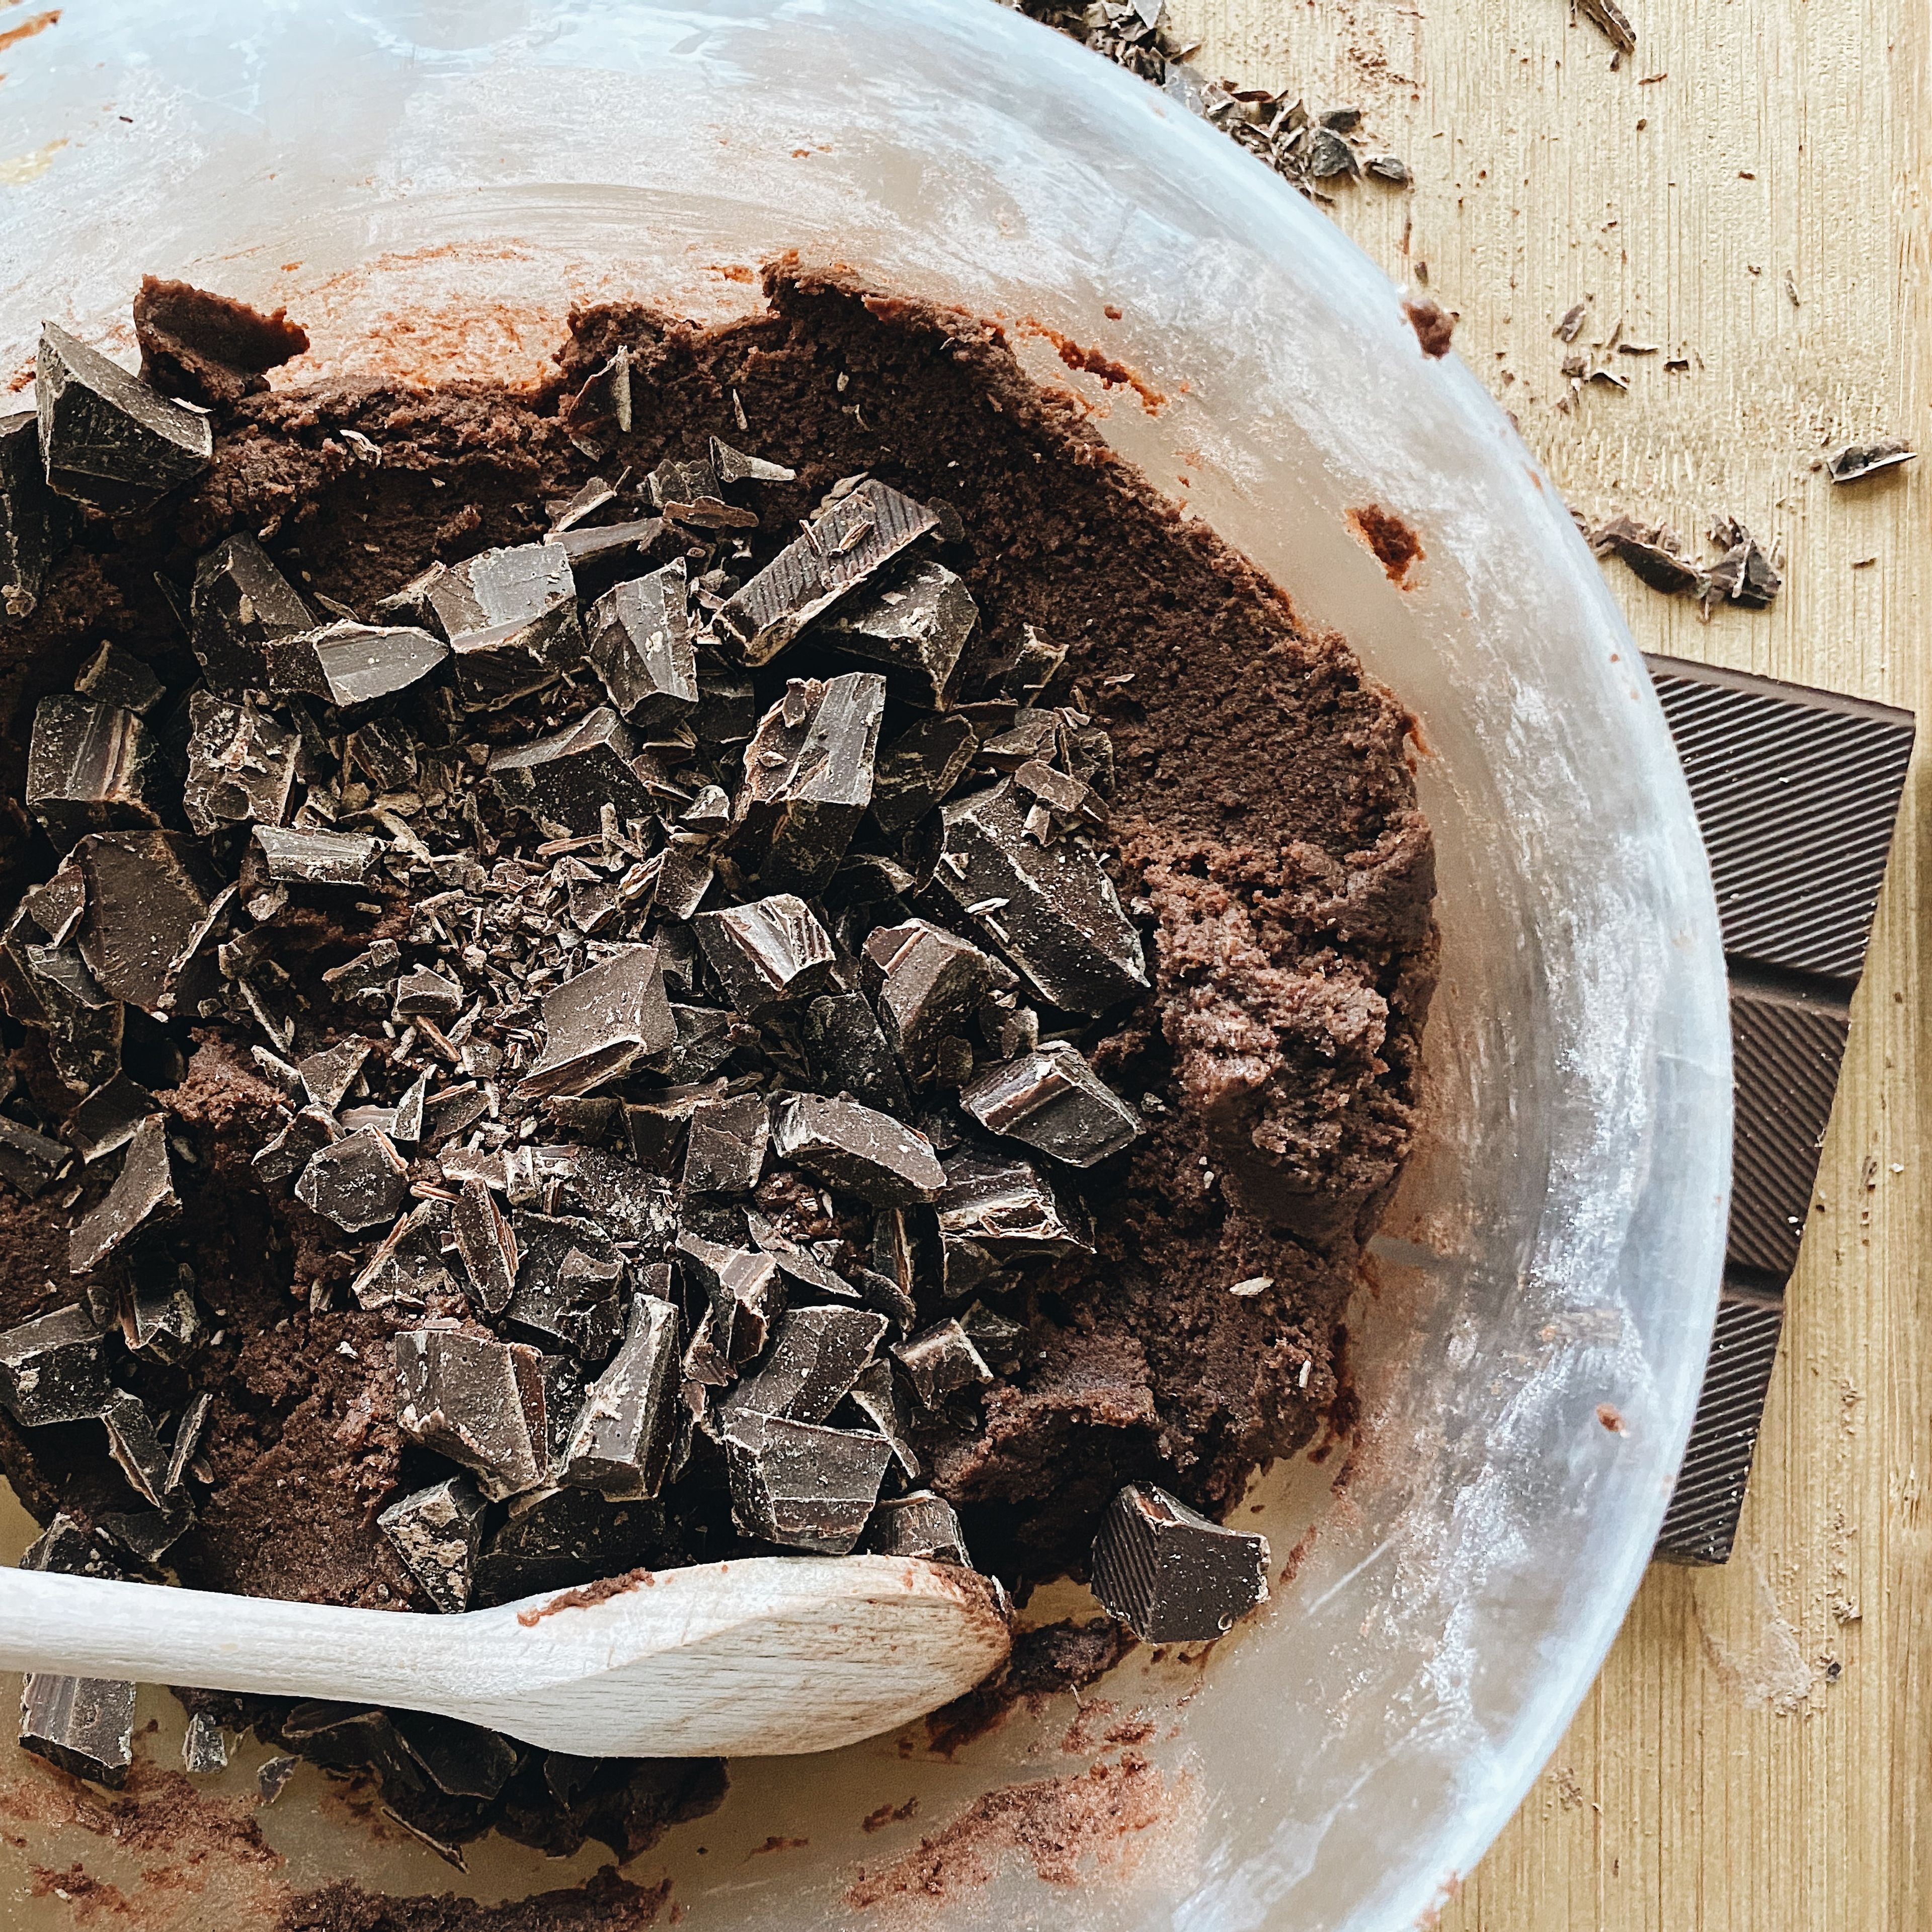 Add chocolate chips to the batter. Alternatively, you can use chopped baking chocolate.